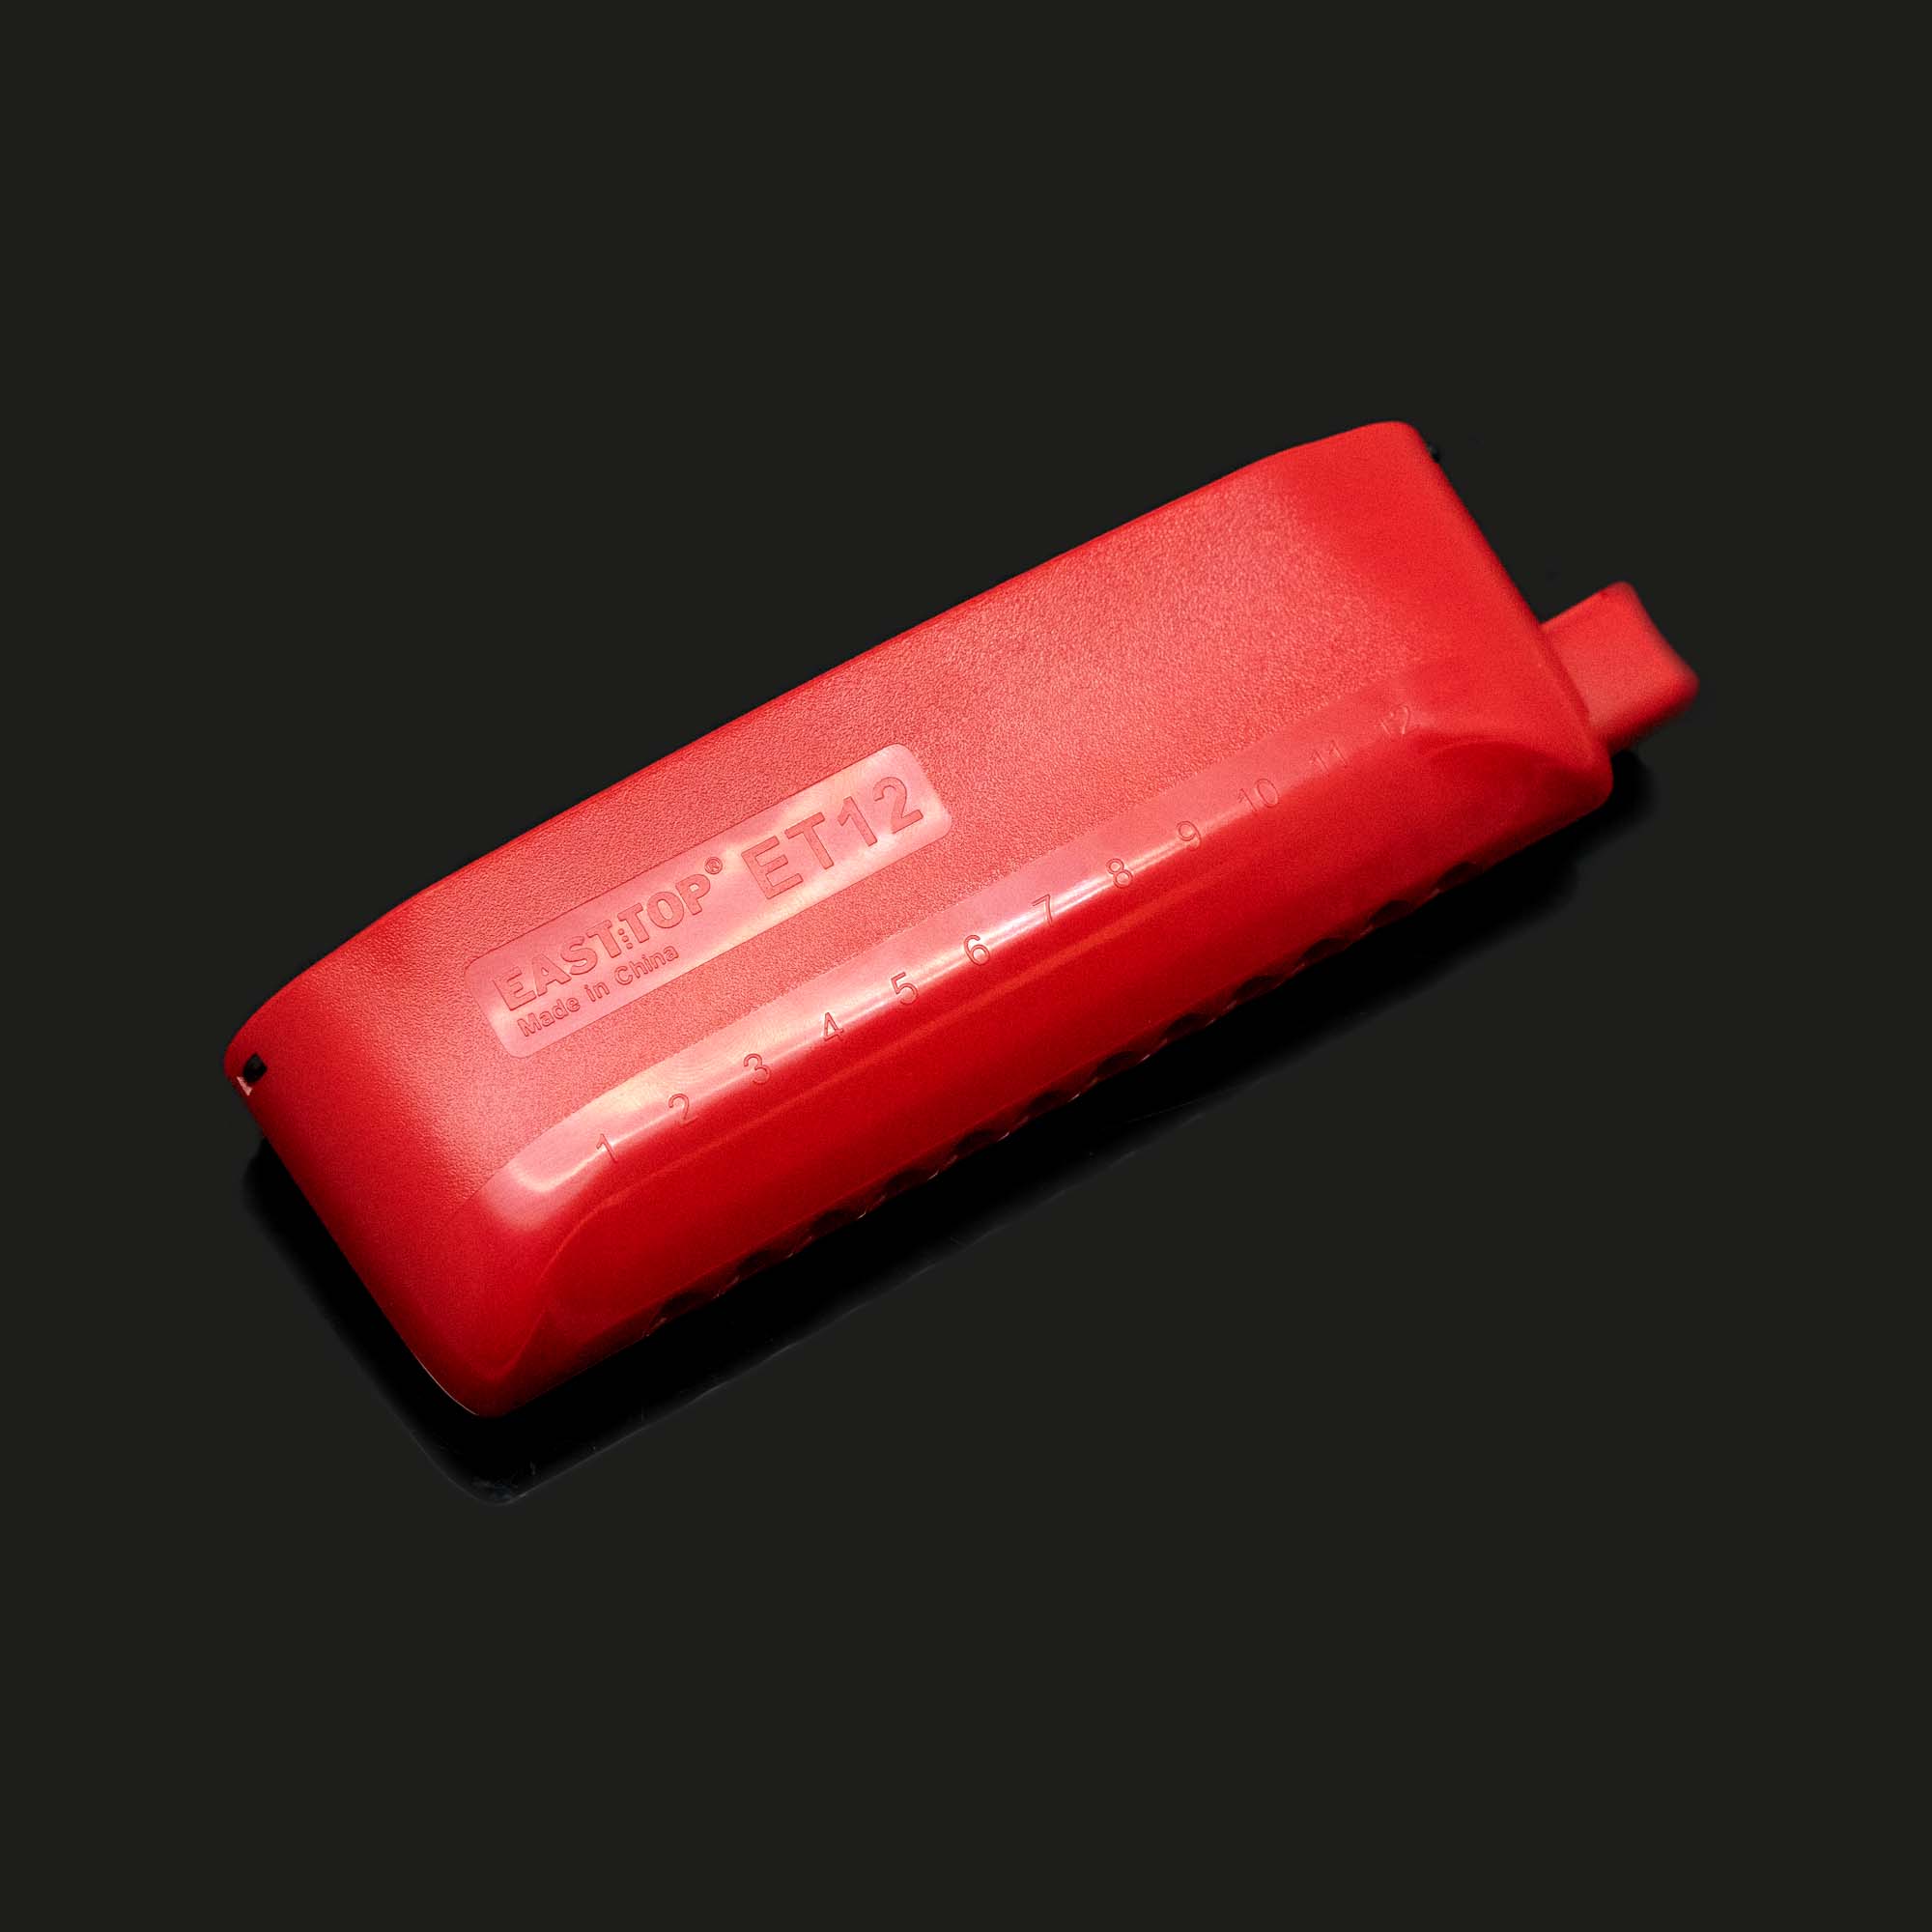 Exclusive Offering: Easttop Harmonica ET12 2024 New Year Limited Edition - Chinese Red, Key of C. Only 30 Available on this Online Store! Ship via FedEx(ET12-RED) Order now and receive a free 8-hole harmonica valued at $9.99 USD - Easttop harmonica